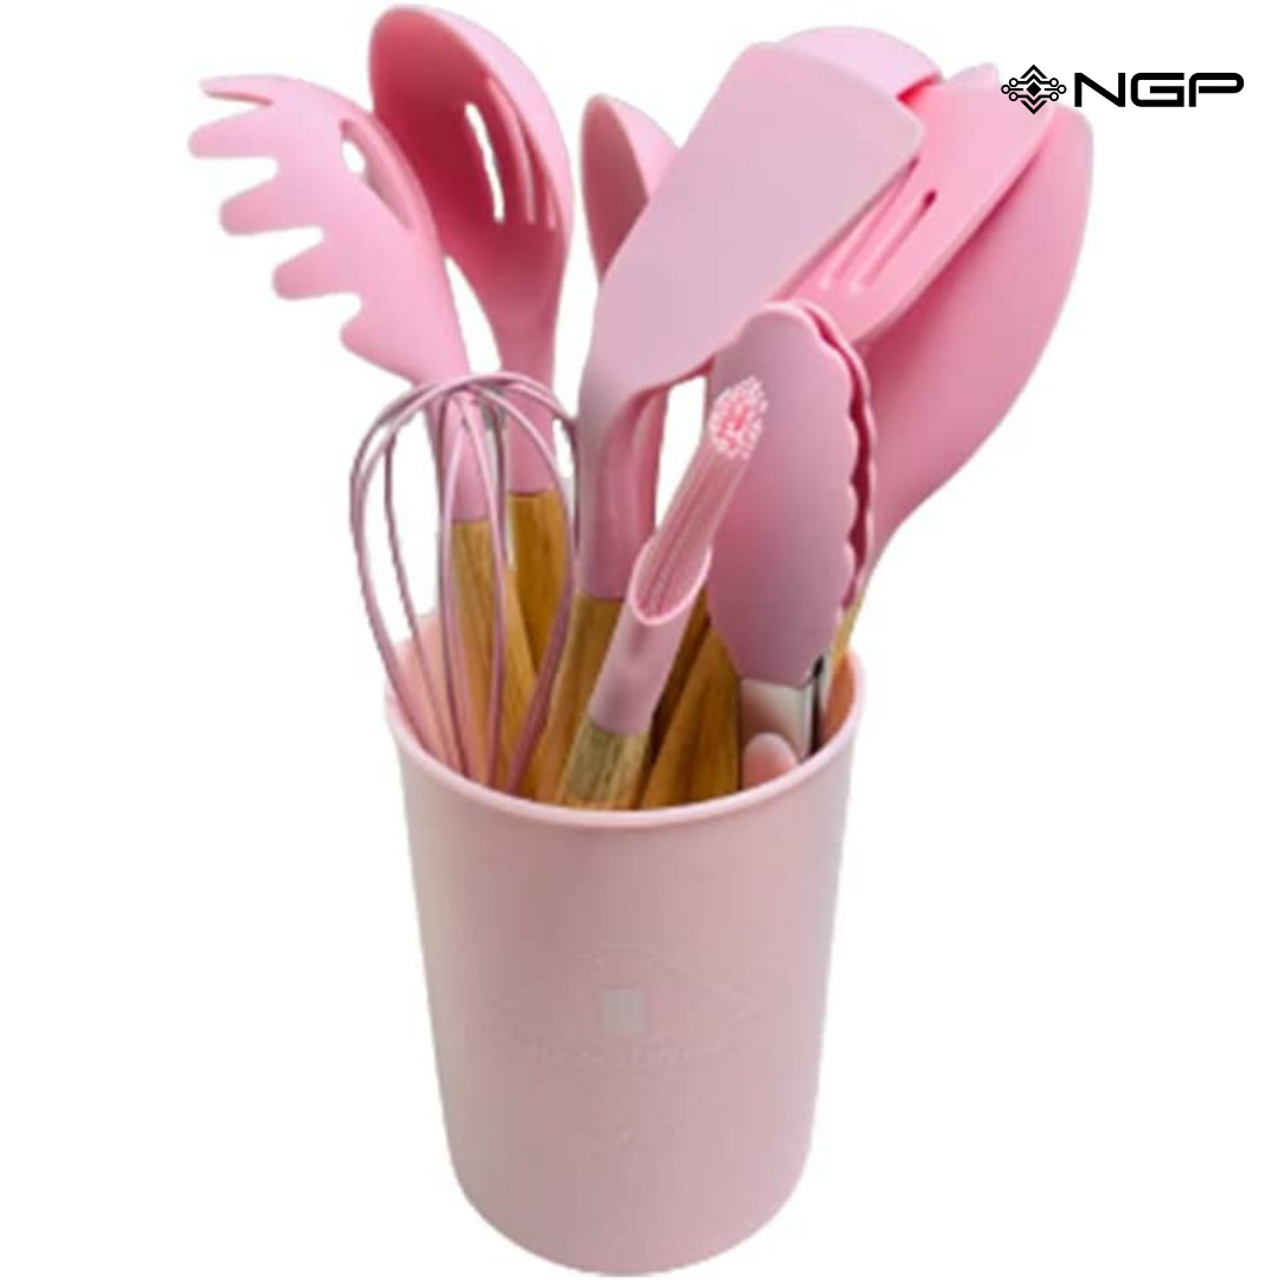 9 Piece Pink Colored Silicone Kitchen Utensils Set with Wooden